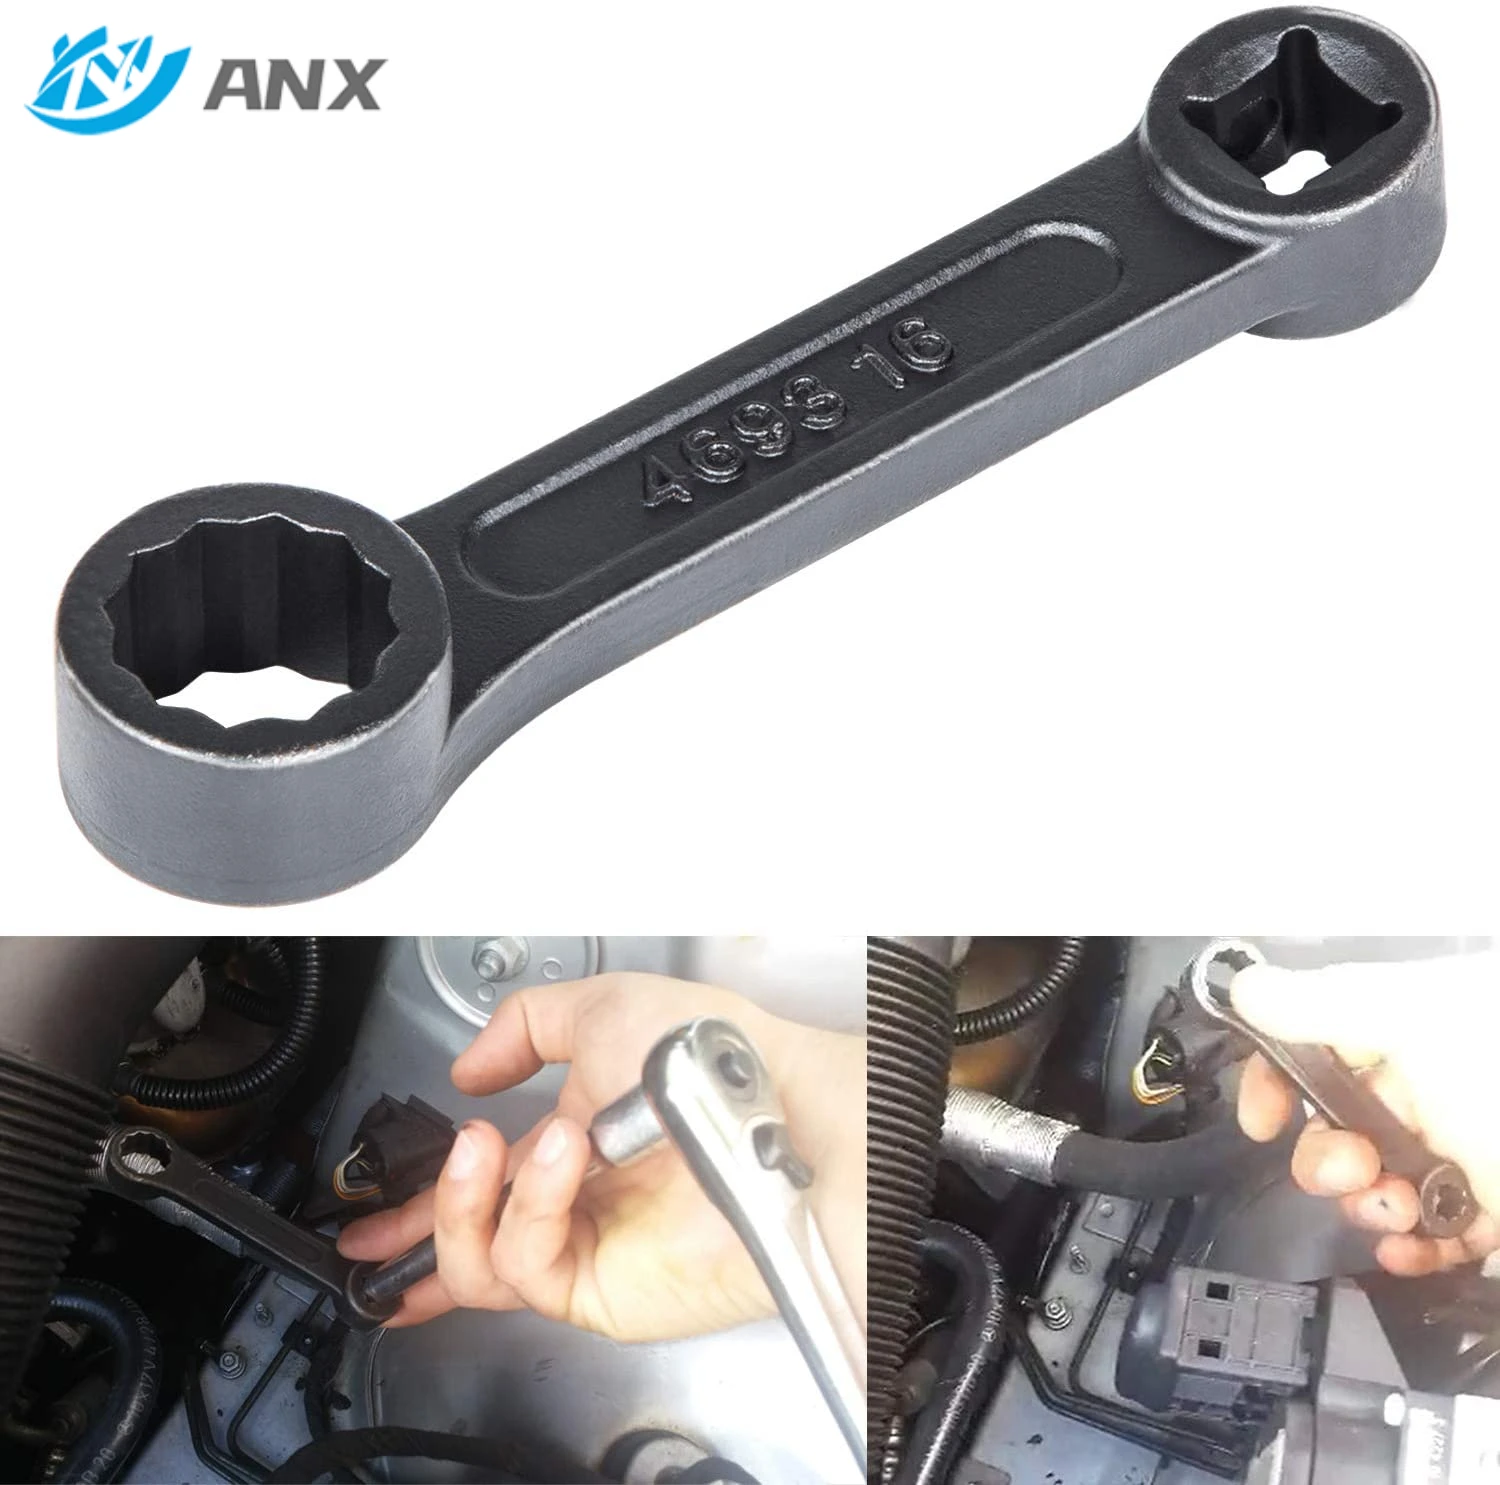 ANX Offset 16mm 4693 Engine Mount Socket Wrench for Mercedes Benz W220/ W210/W203/W221/W211/W204 anx offset 16mm 4693 engine mount socket wrench for mercedes benz w220 w210 w203 w221 w211 w204